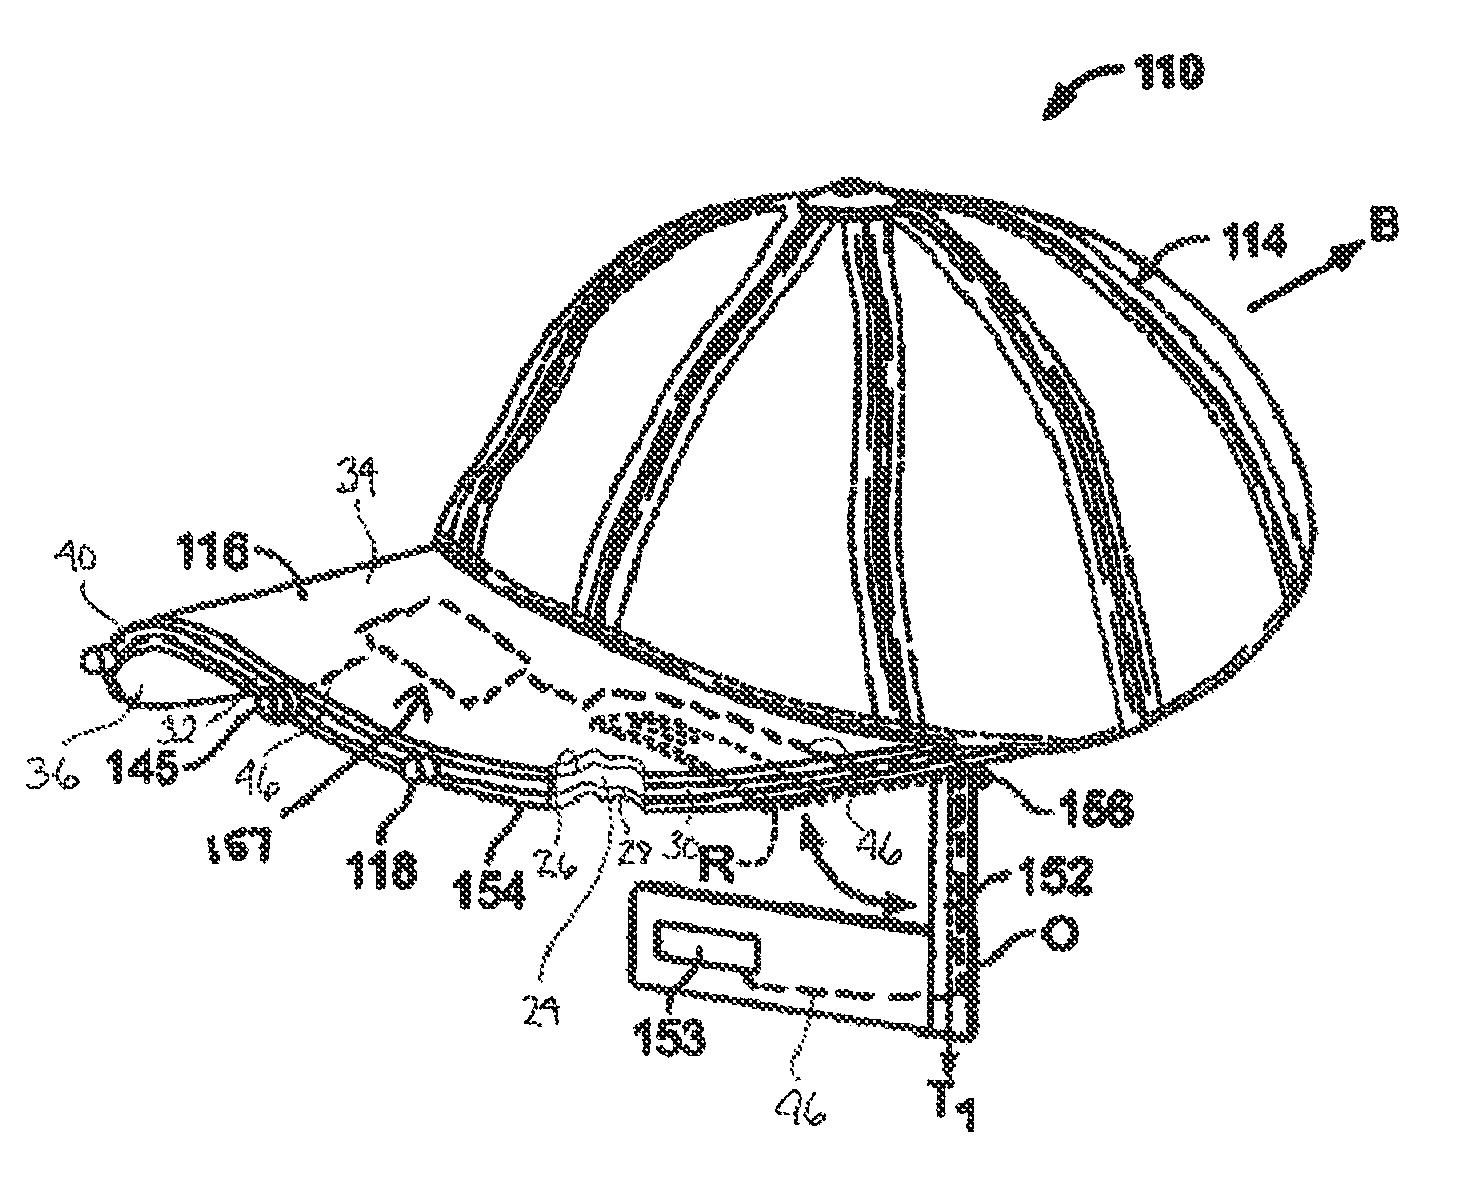 Headgear having an electrical device and power source mounted thereto